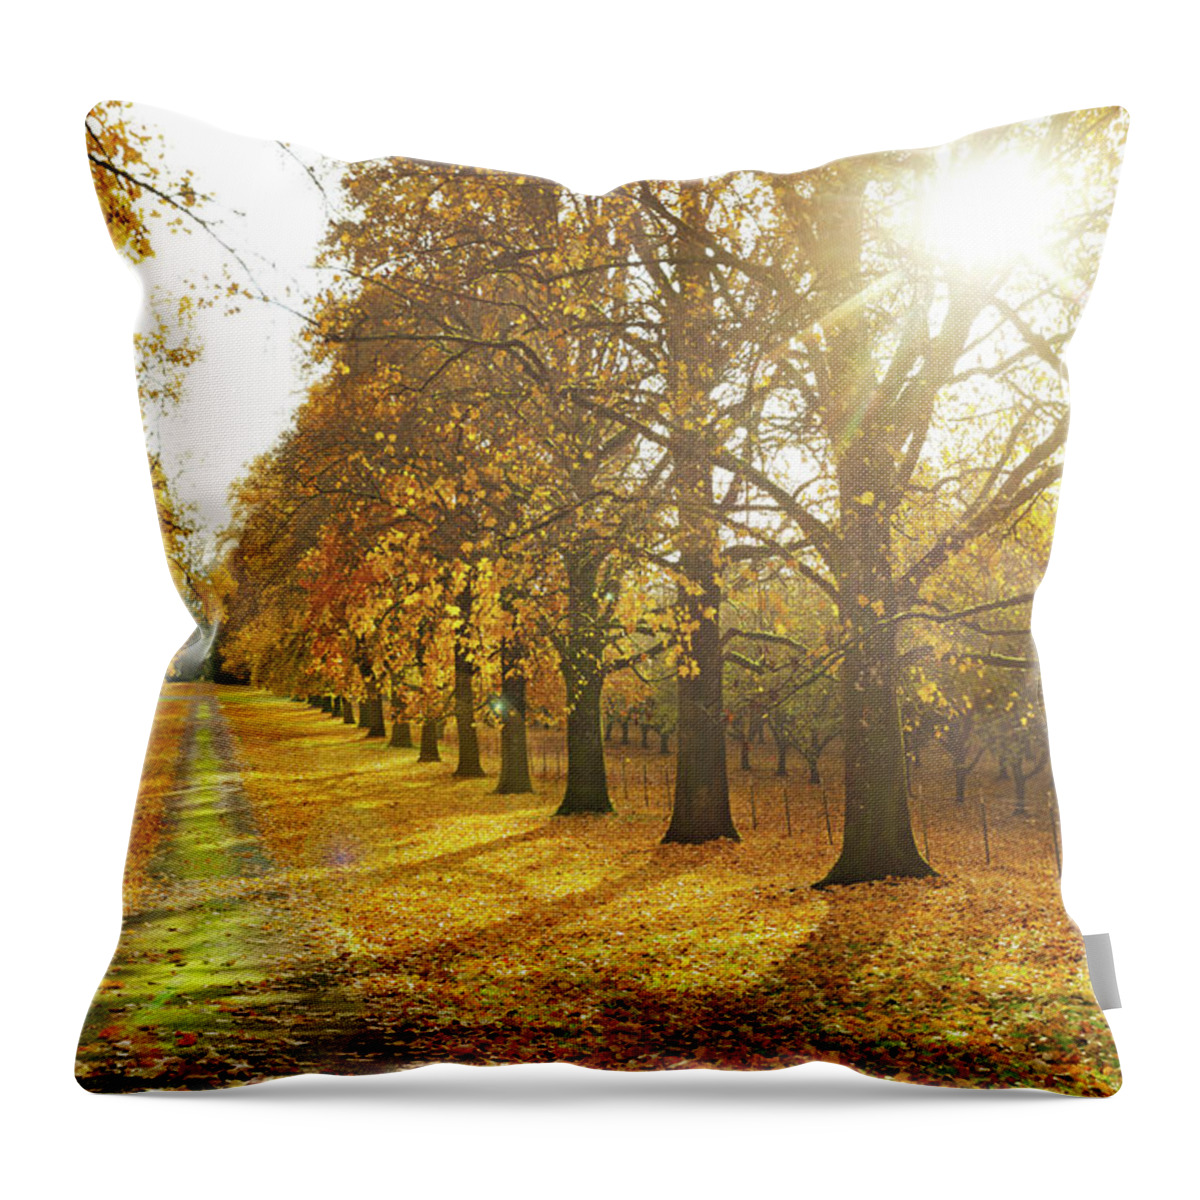 Scenics Throw Pillow featuring the photograph Country Lane In Autumn by Jackscoldsweat